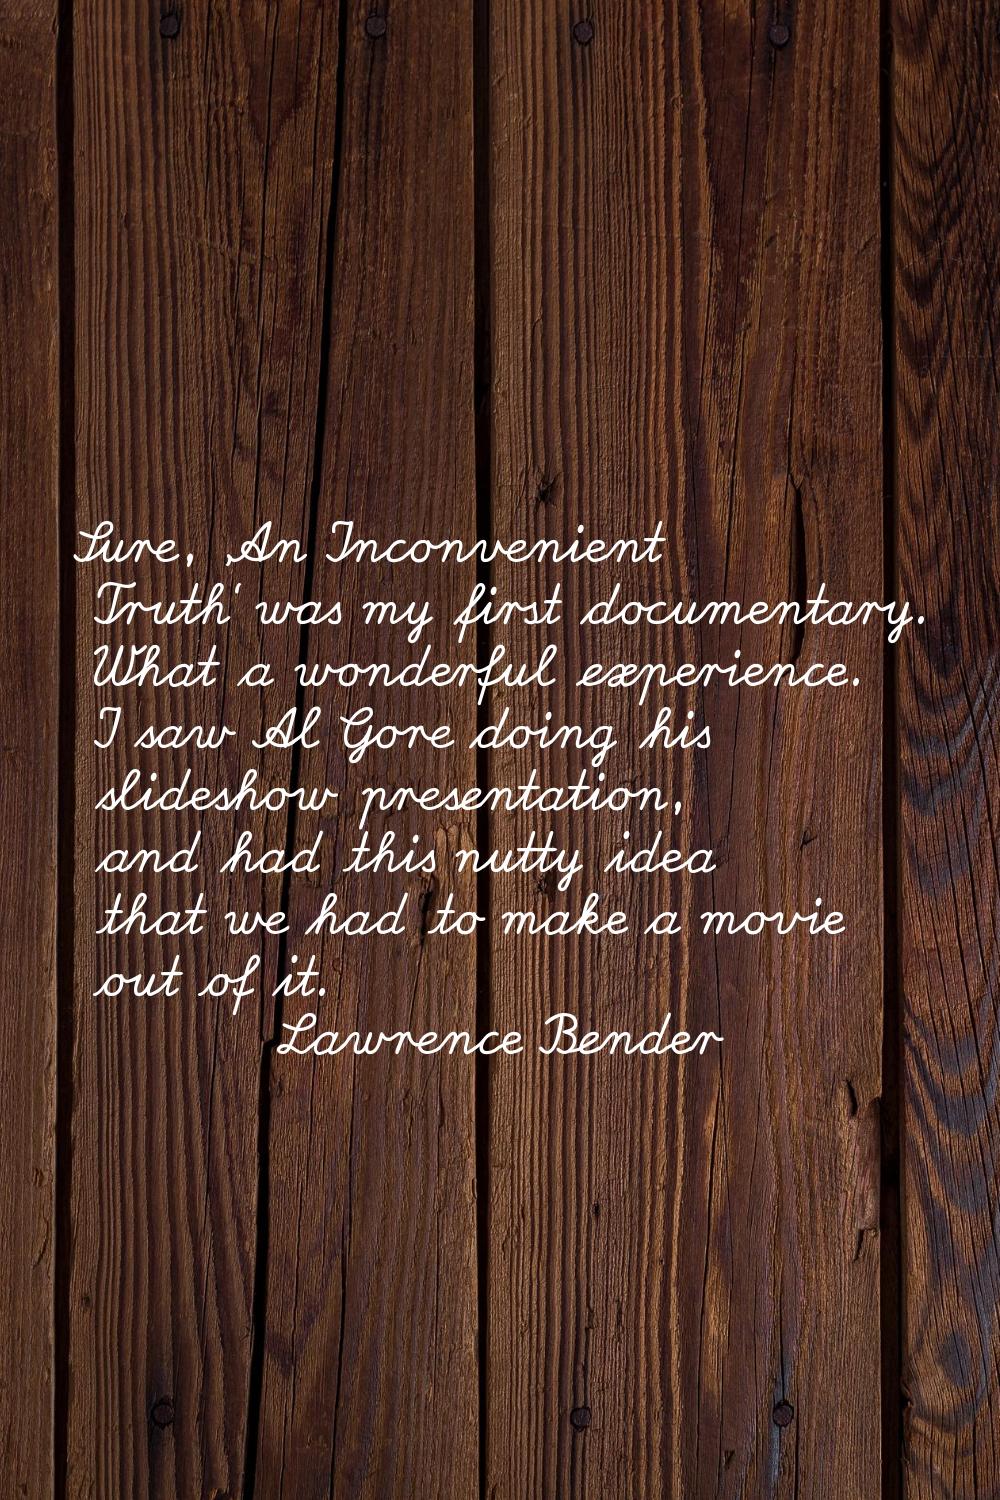 Sure, 'An Inconvenient Truth' was my first documentary. What a wonderful experience. I saw Al Gore 